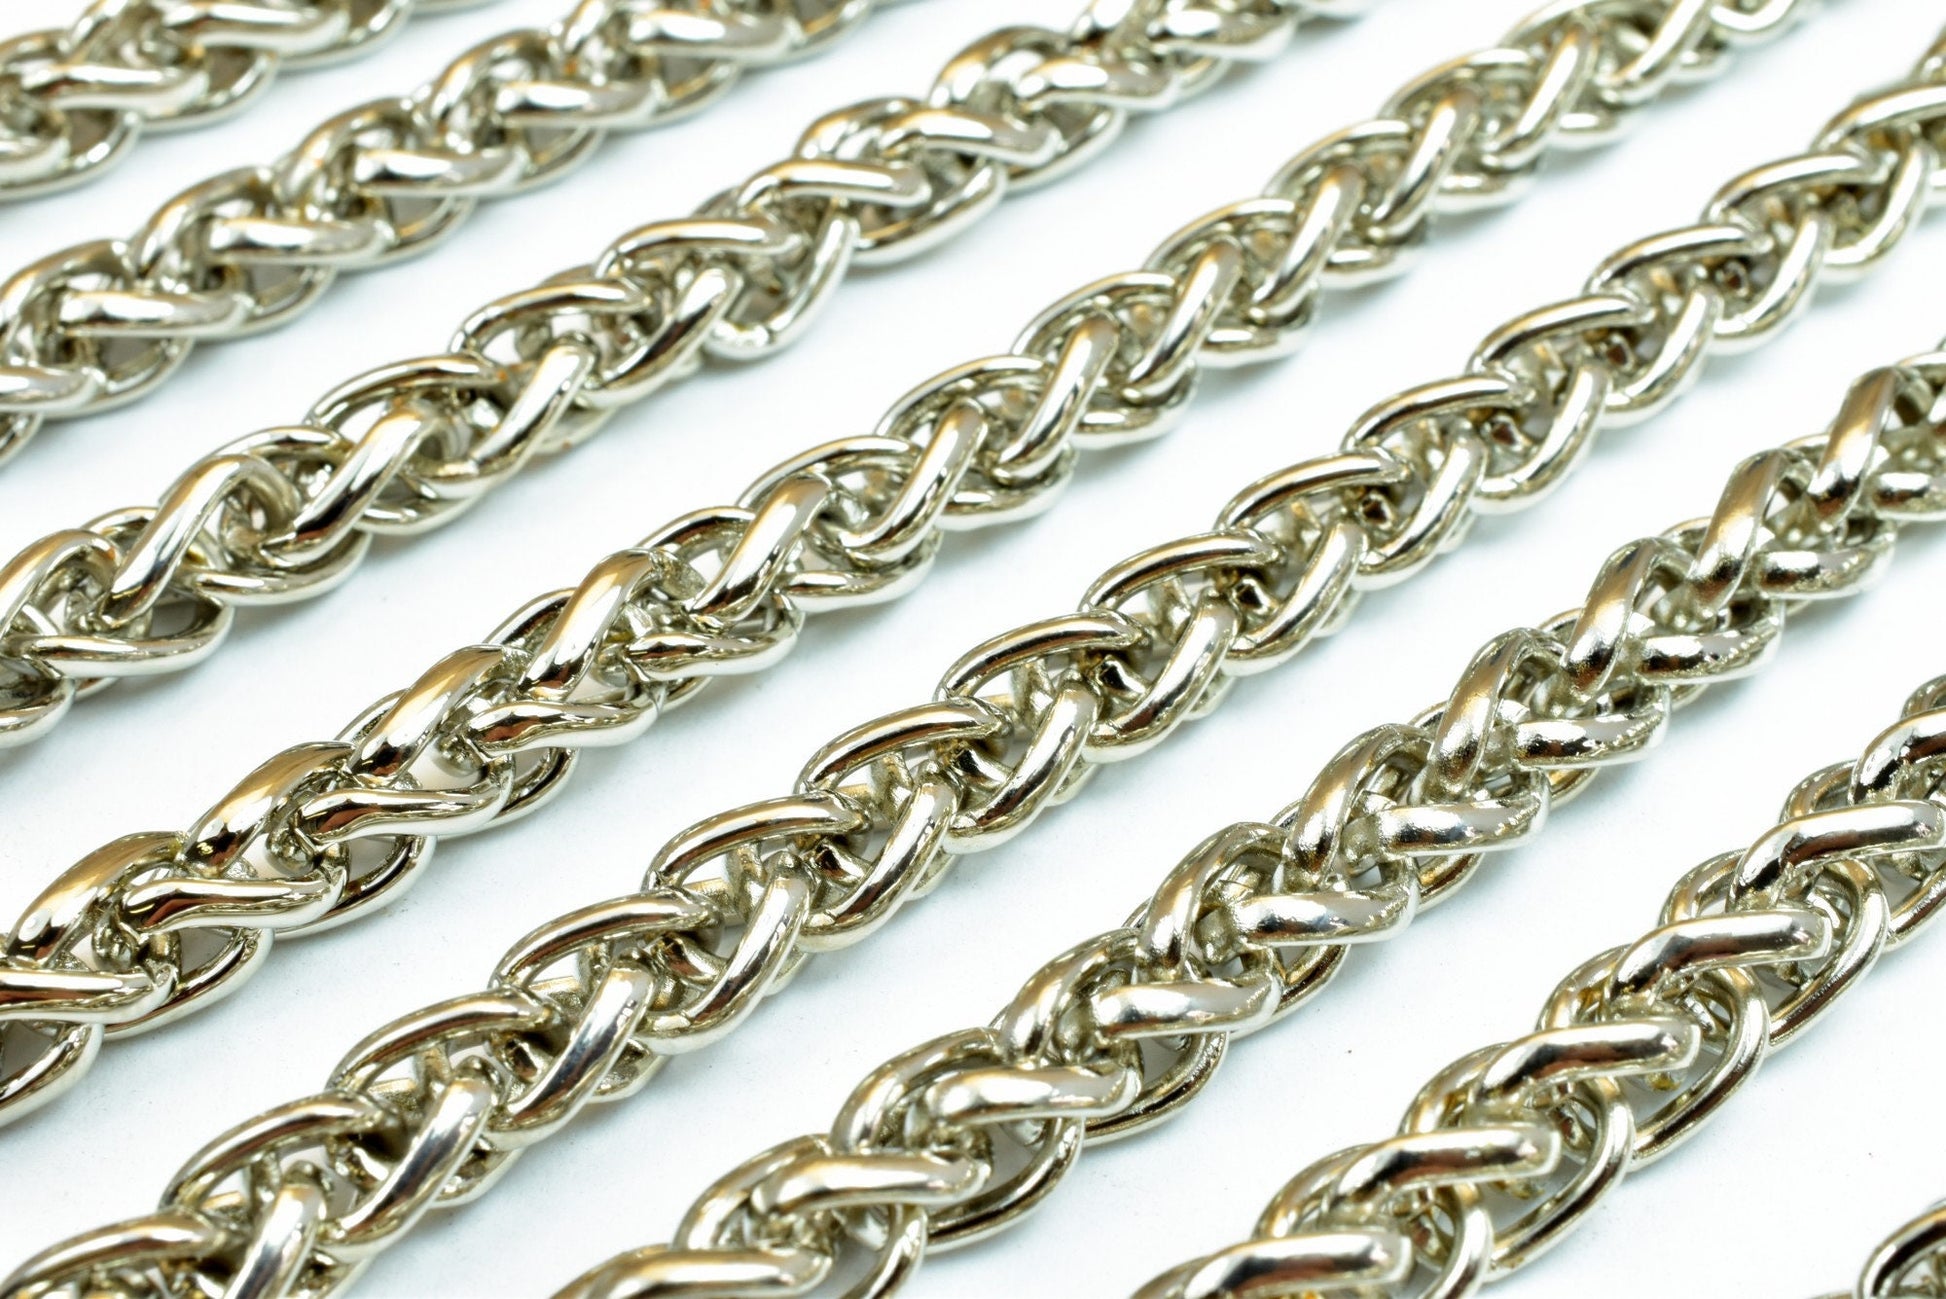 Spiga or Wheat Rhodium Filled White Gold Filled Chain 22" Inch CS5 For Jewelry Making